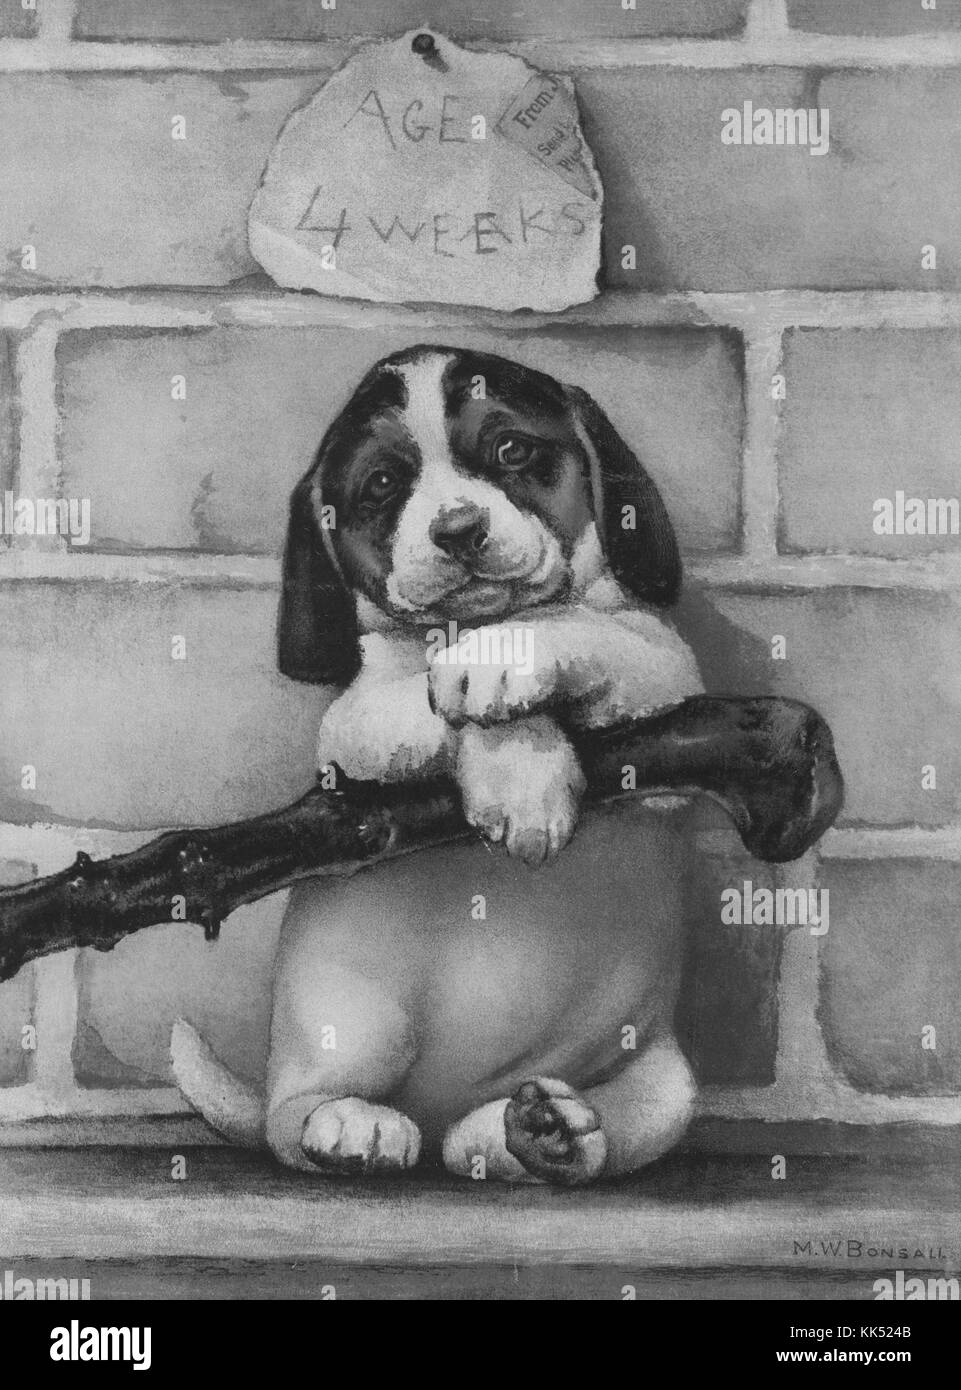 Color print of a puppy with a stick, sitting in front of a brick wall, piece of paper above his head reads '4 Weeks', art by MW Bonsail, published by L Prang and Company, 1900. From the New York Public Library. Stock Photo